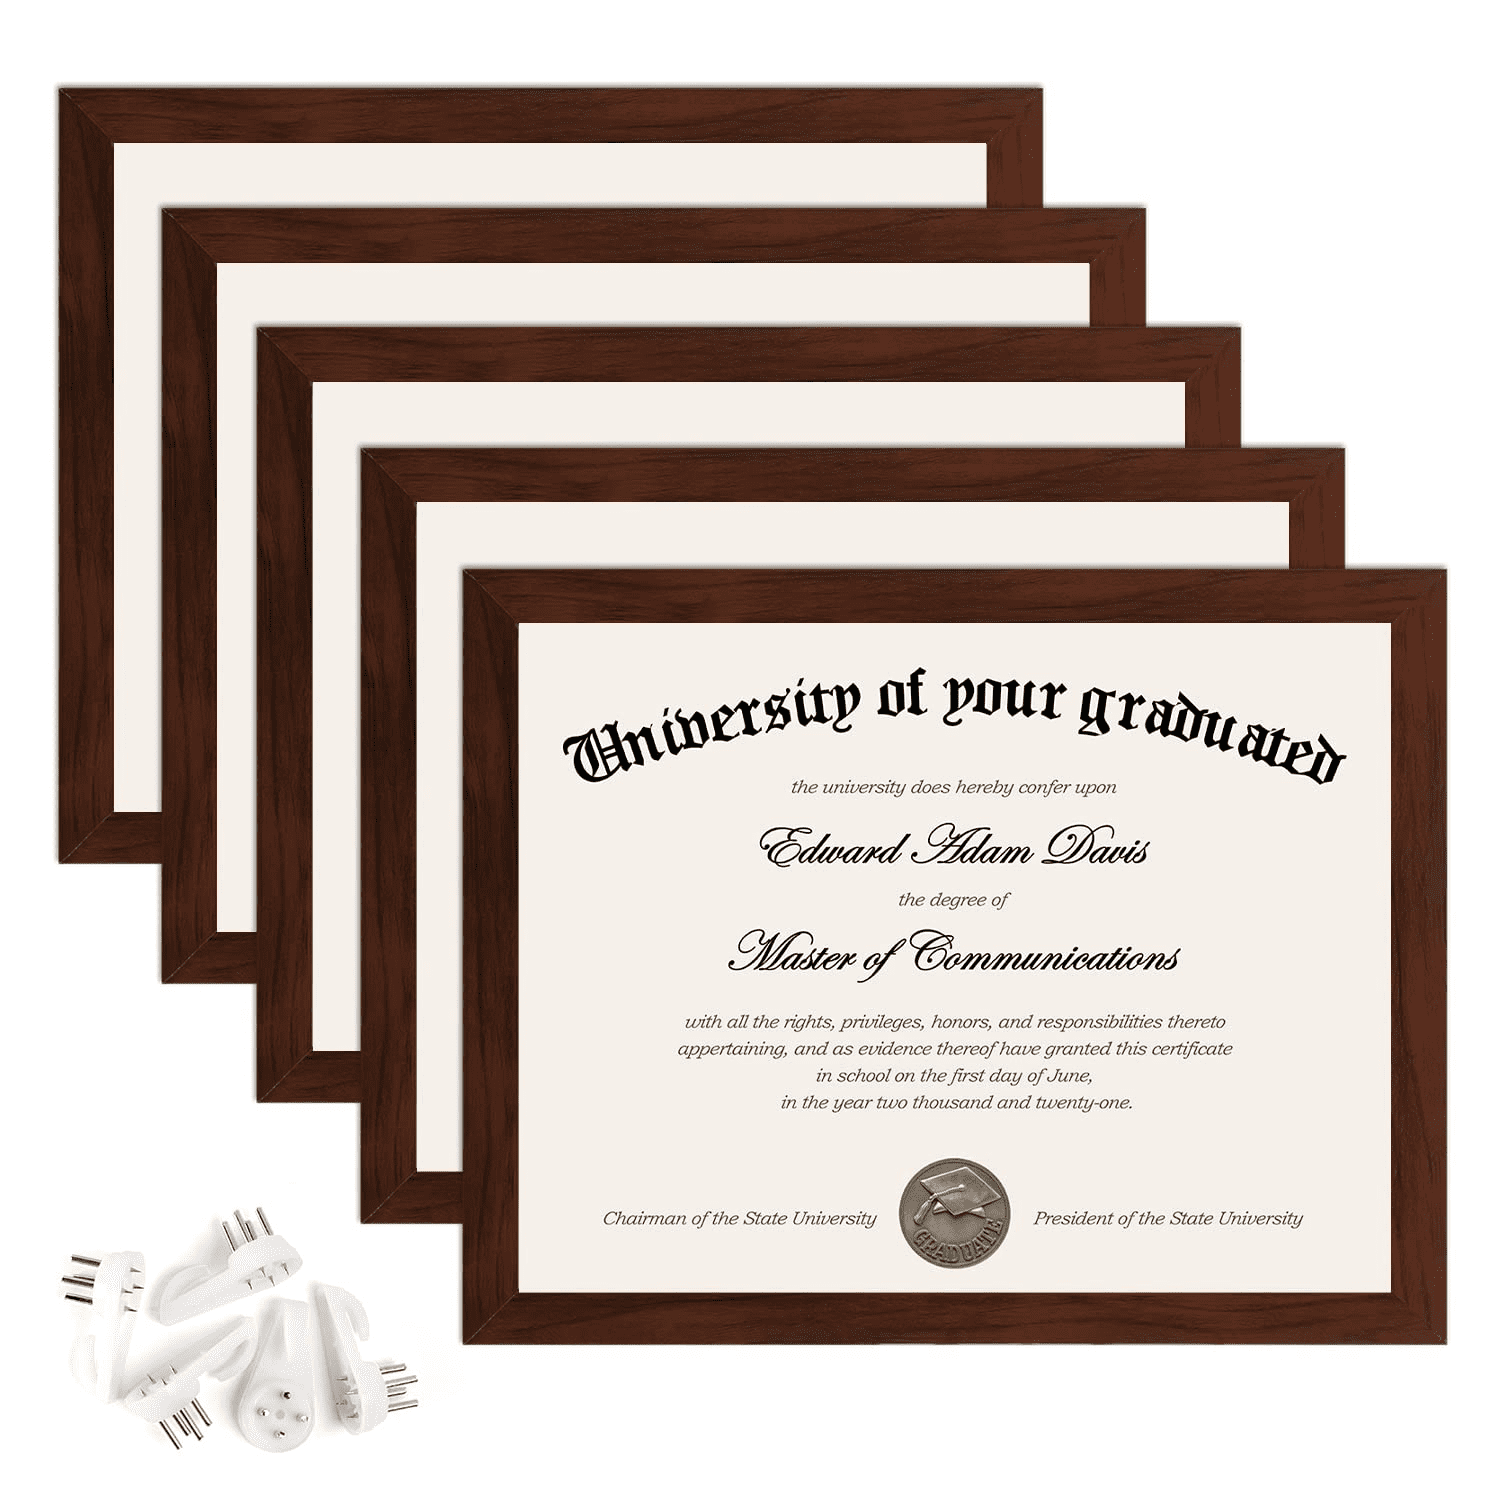 Details about   8.5x11 Certificate Frames With Stand Rustic Wood Document High Definition Glass 